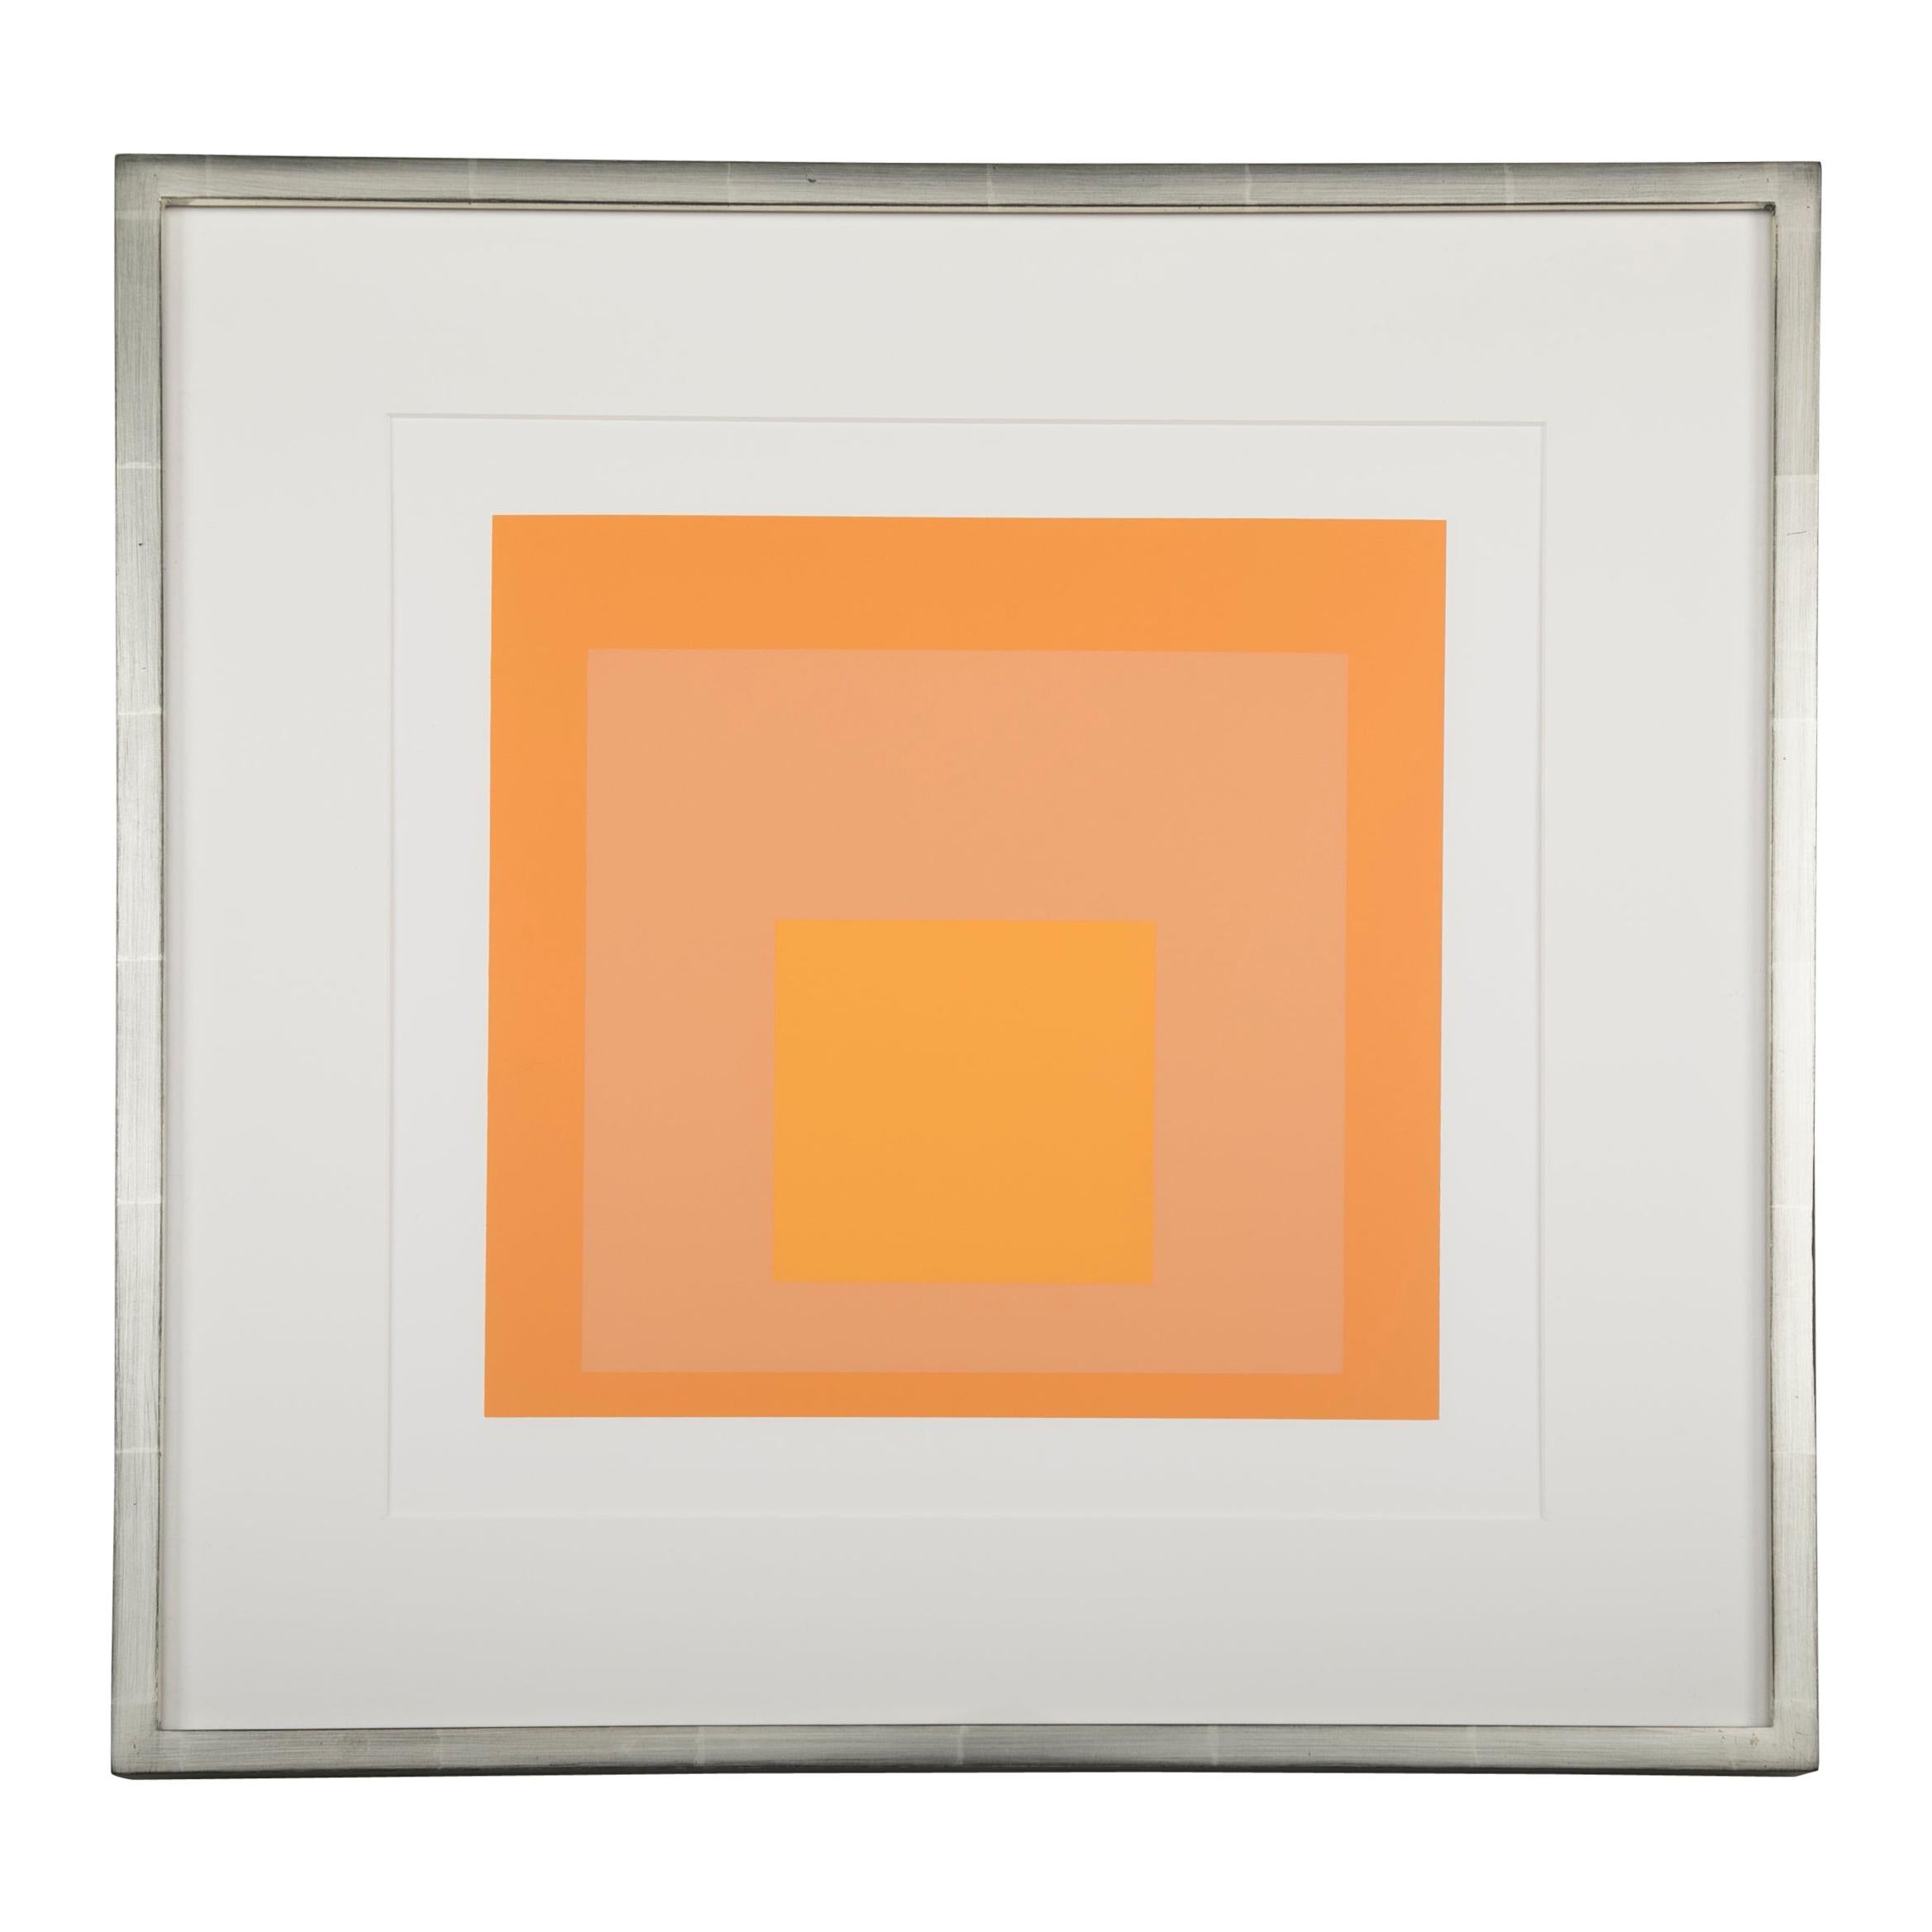 Josef Albers "Homage To The Square"